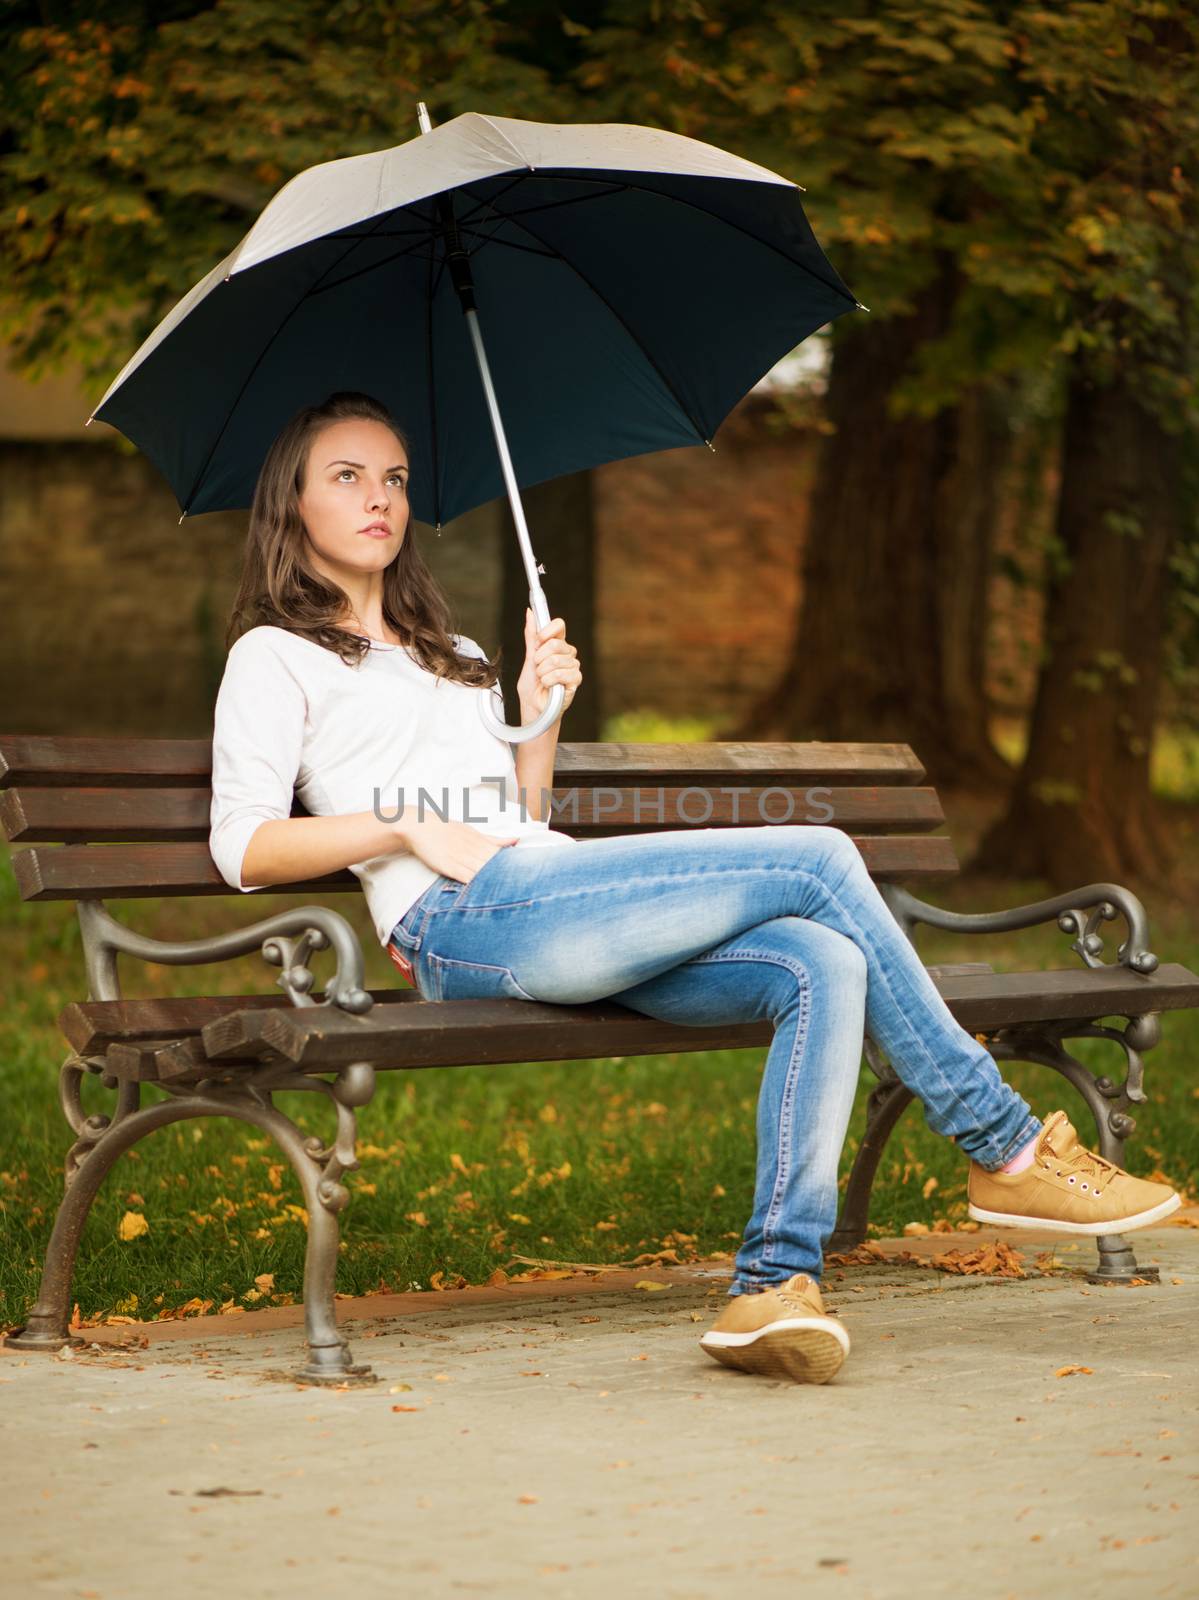 Lonely woman with umbrella sitting on the bench in the park.